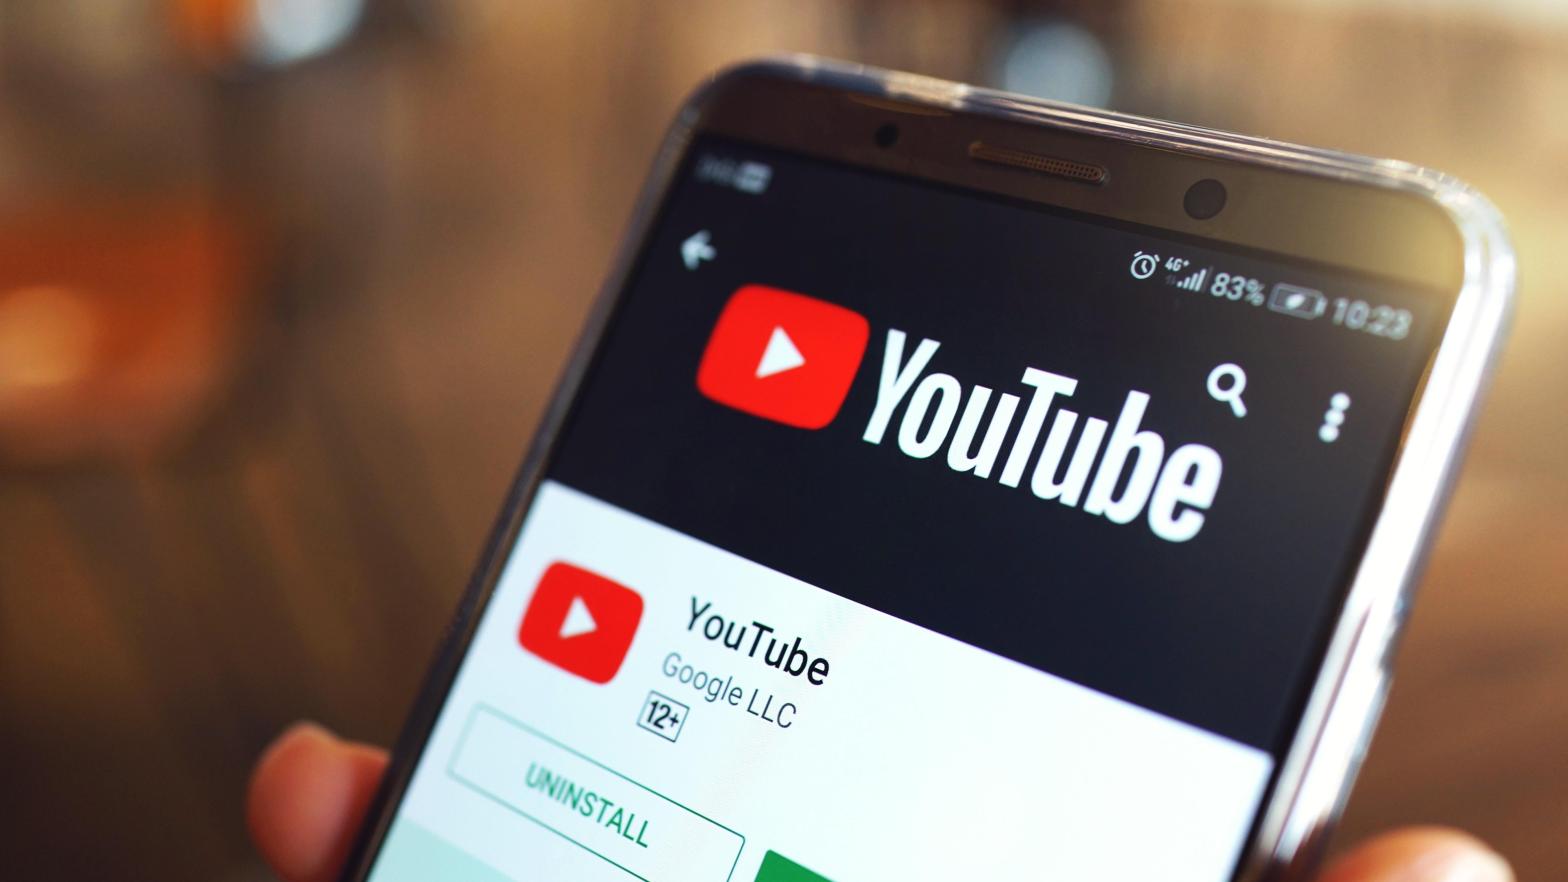 Google will still delete inactive Google Workspaces and empty YouTube accounts. (Image: AngieYeoh, Shutterstock)